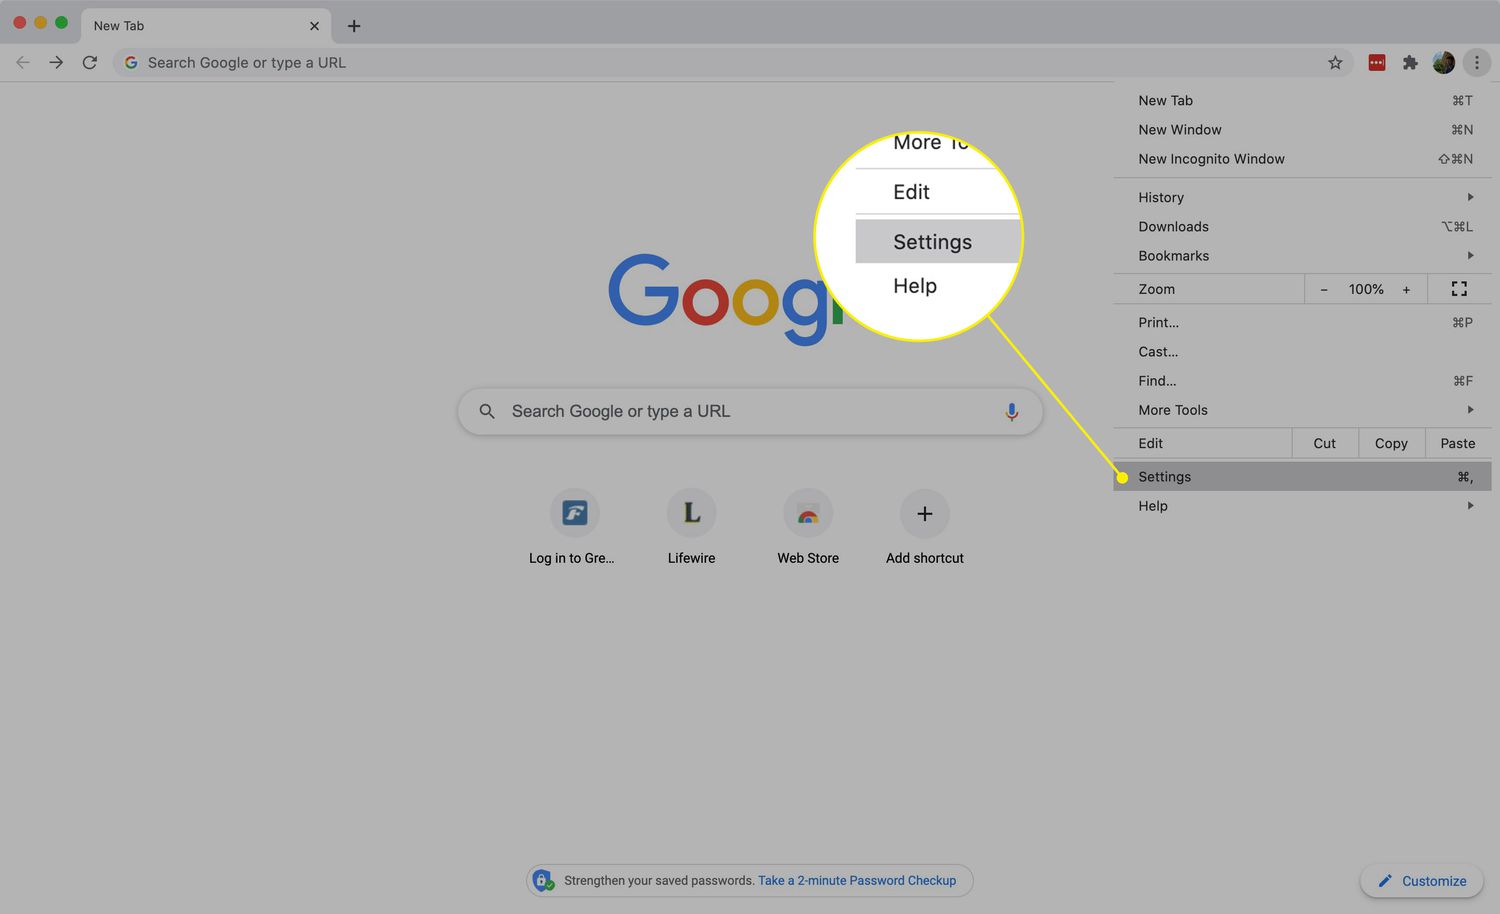 How To Change My Startup Page In Chrome